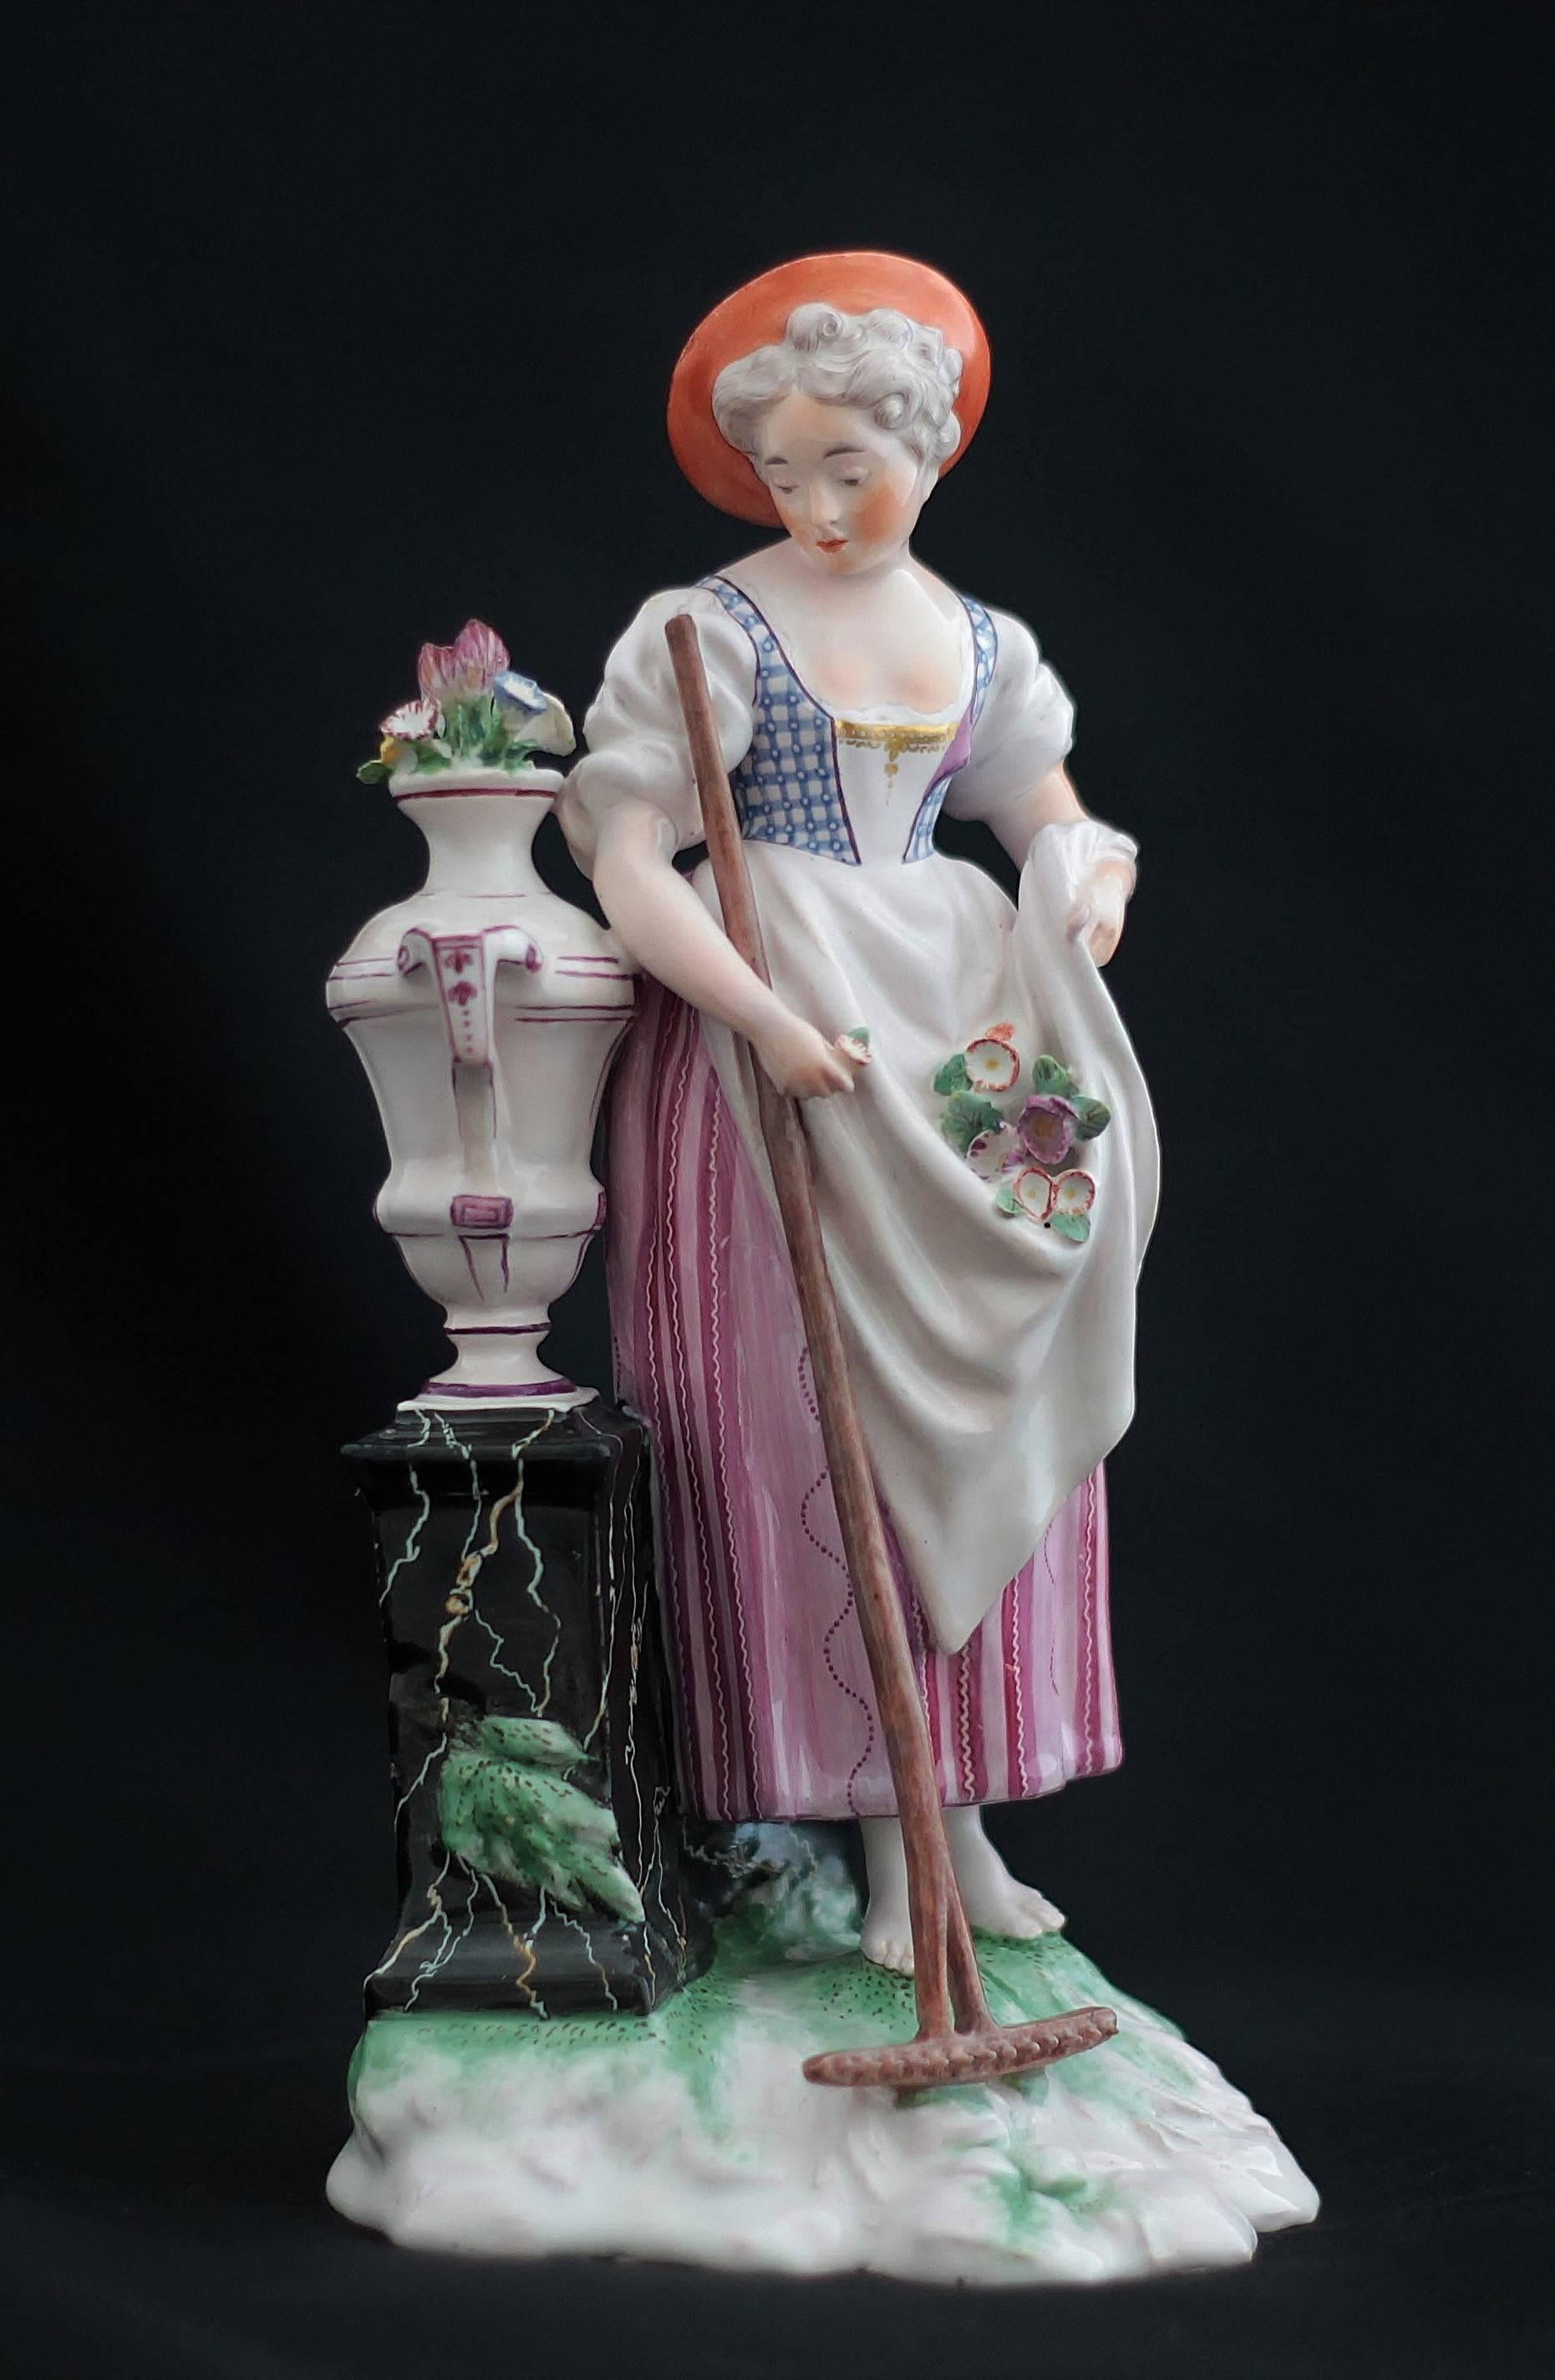 Figure of Niderviller faience representing a young woman holding flowers and rake near a vase put on a stele in false marble,
18th century.
Measures: Height 22 cm, width 11 cm, depth 10.4 cm.
Handle of the rake restored, chips at the hat and at